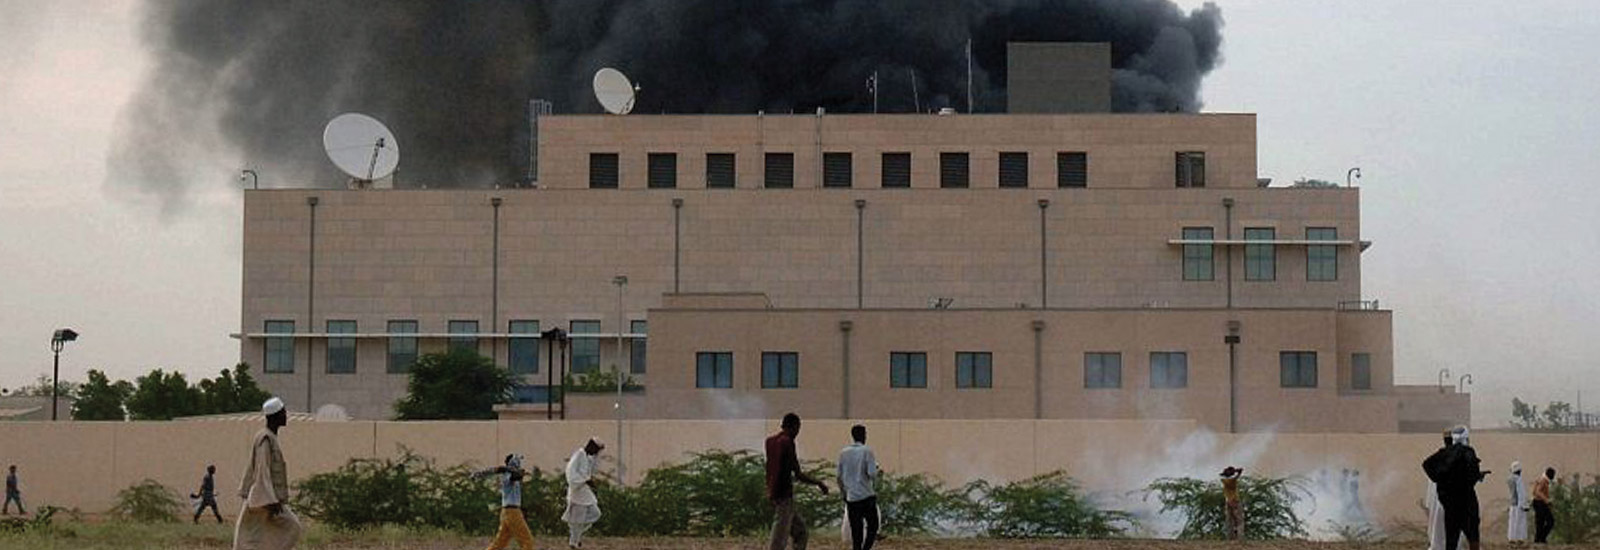 Image of a large embassy building with black smoke